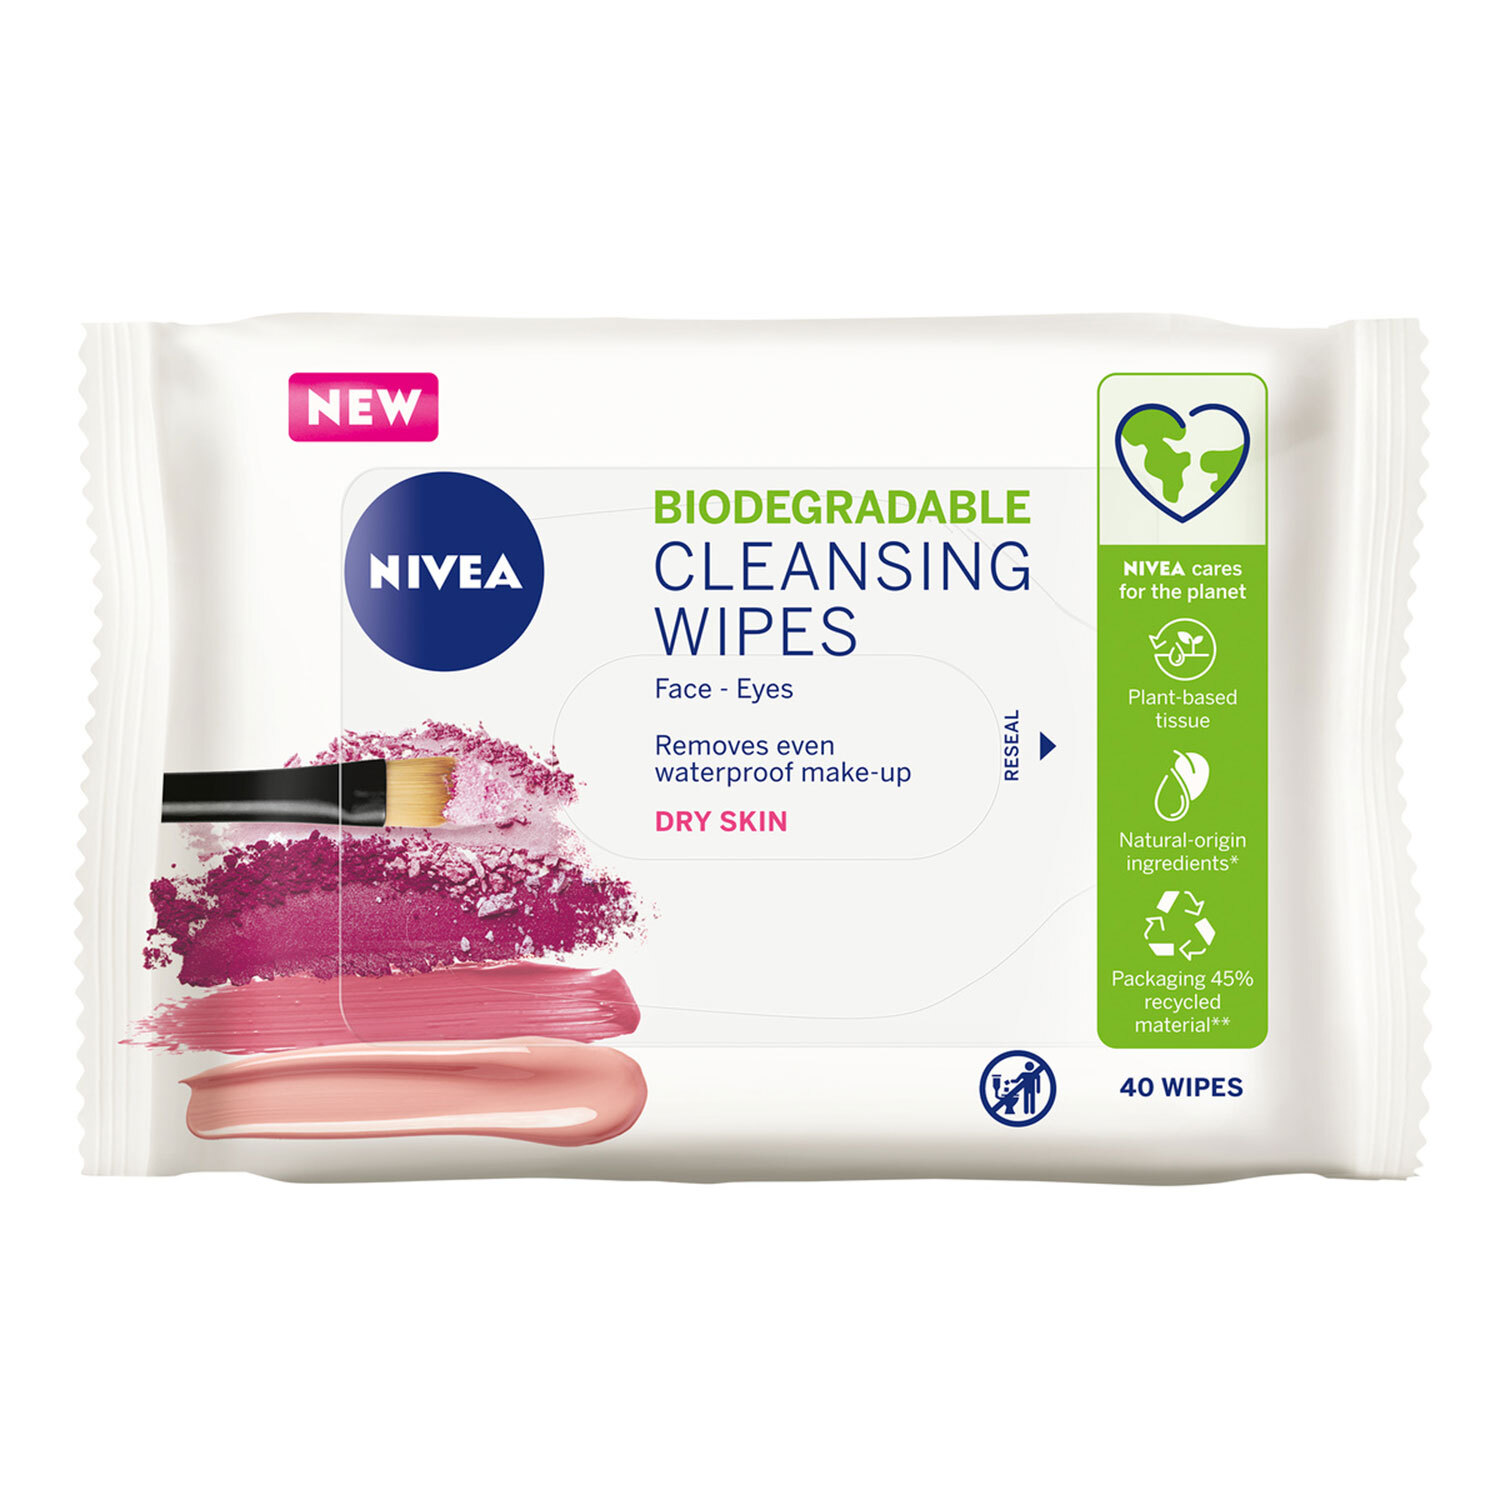 Nivea Biodegradable Dry Skin Cleansing Wipes Image